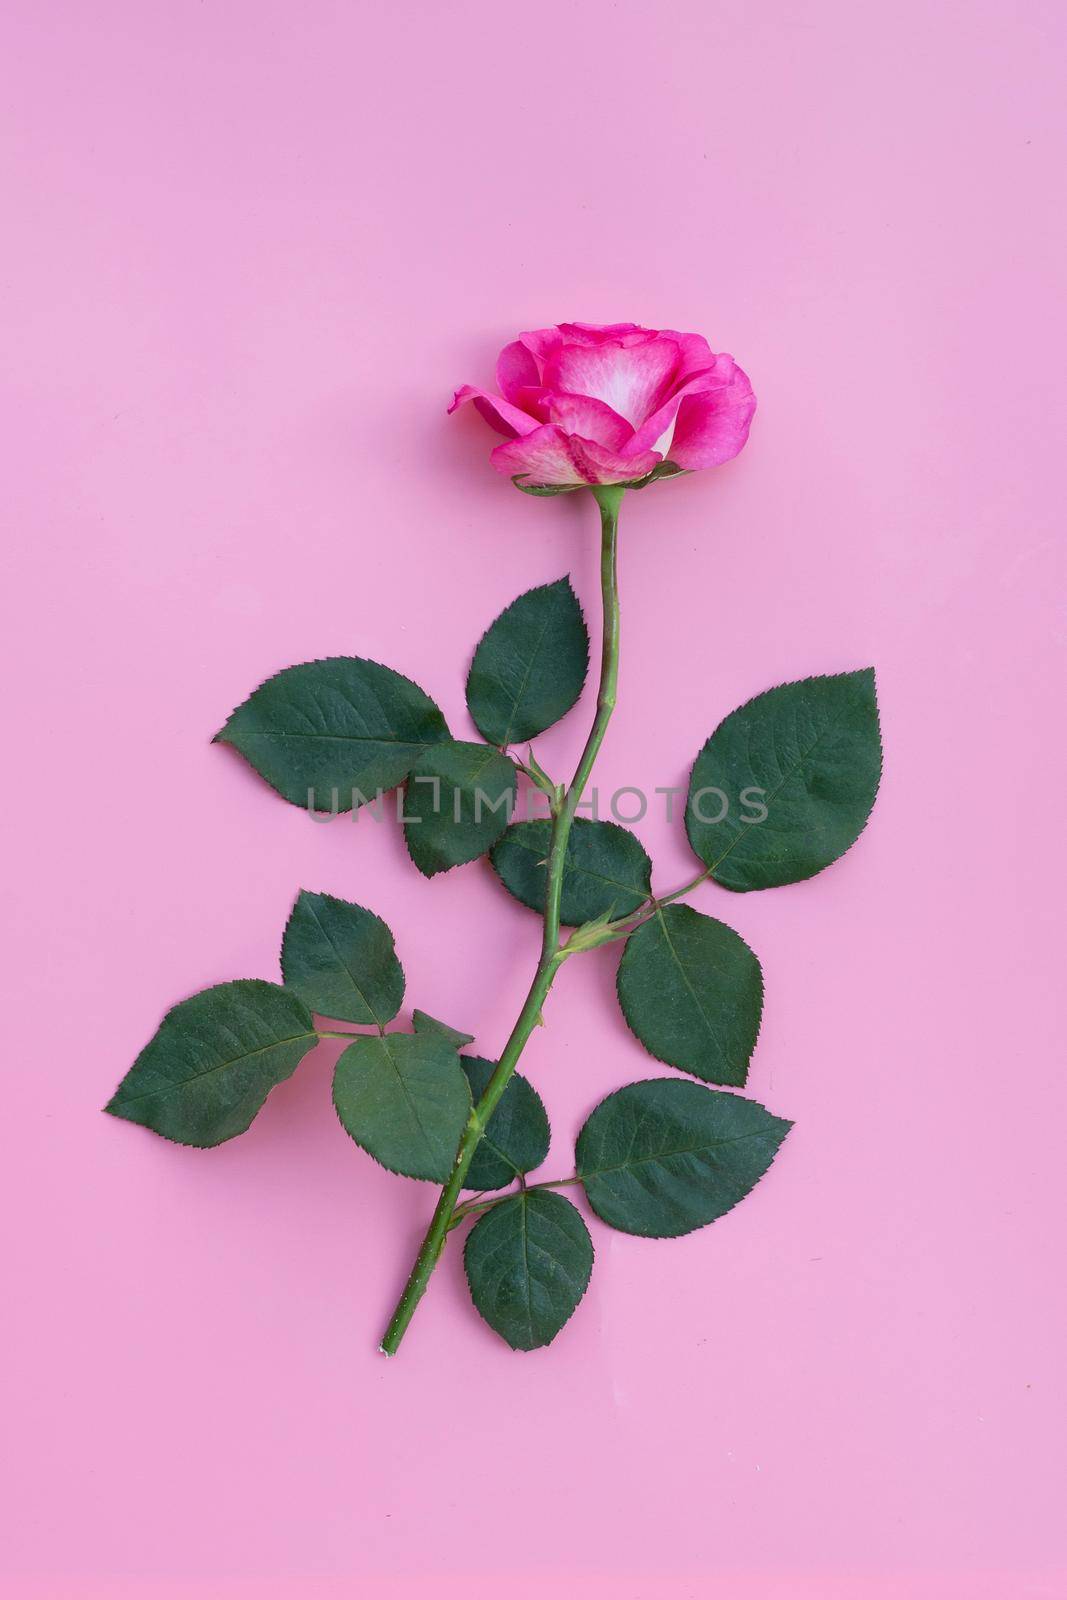 Rose on pink background.  Valentine's day concept background by Bowonpat